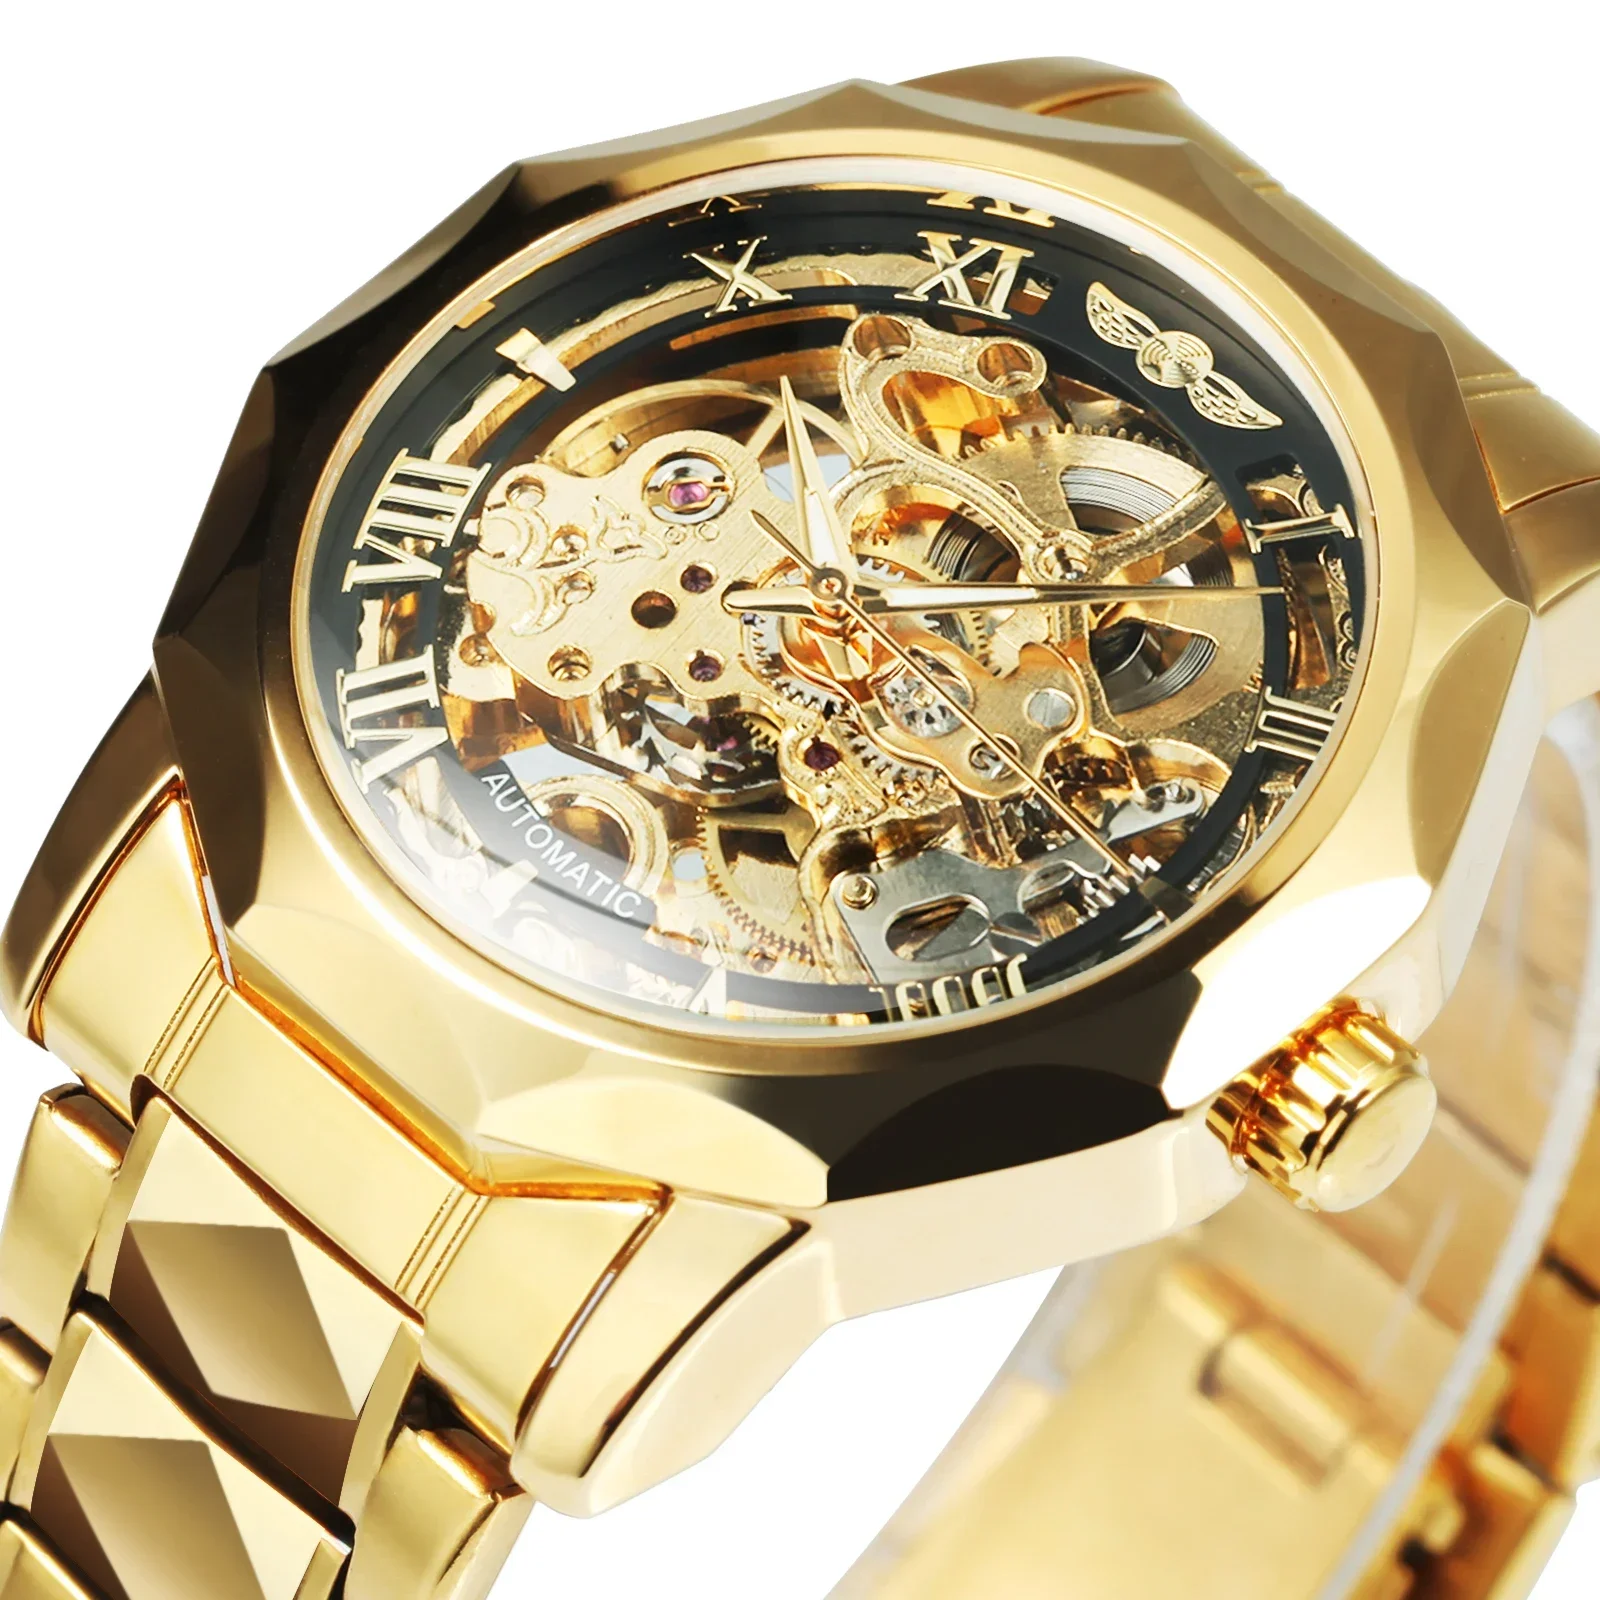 

WINNER Watch Men Luxury Gold Skeleton Watches Stainless Steel Strap Automatic Mechanical Wristwatches Men Relojes Para Hombre